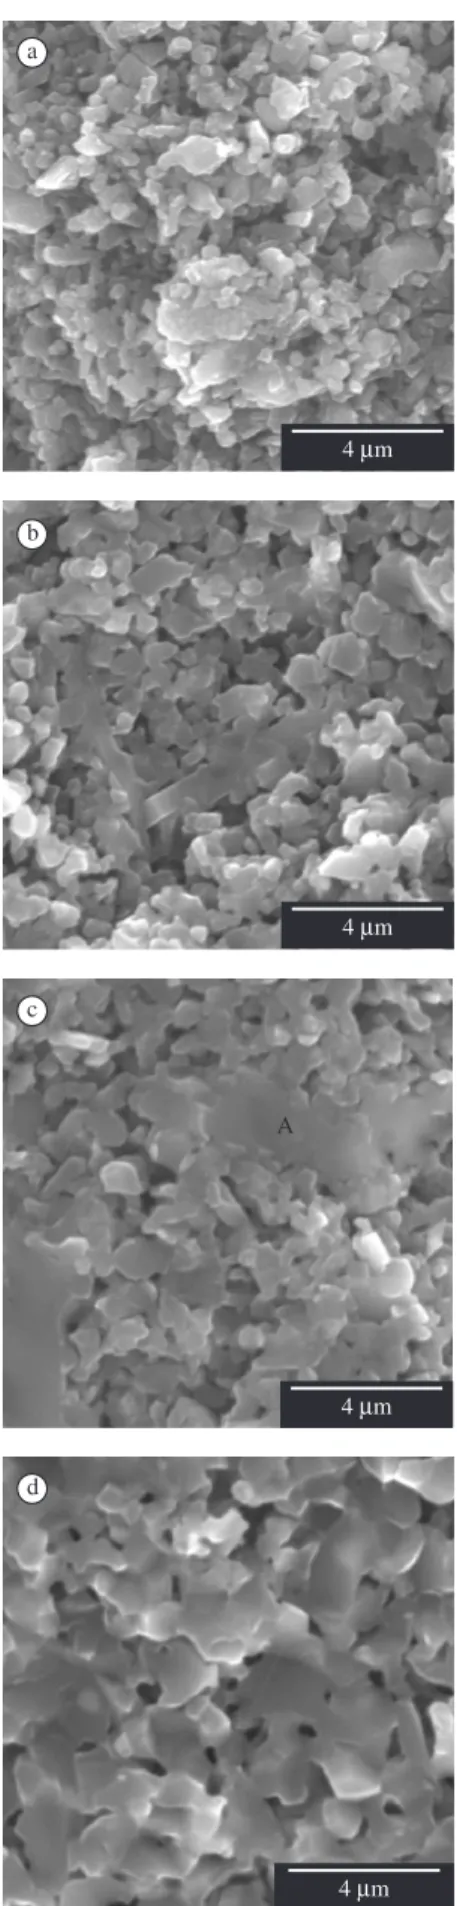 Figure 3. SEM images of: a) AlN-2% CaO sintered at 1600 °C for 7 minutes; 